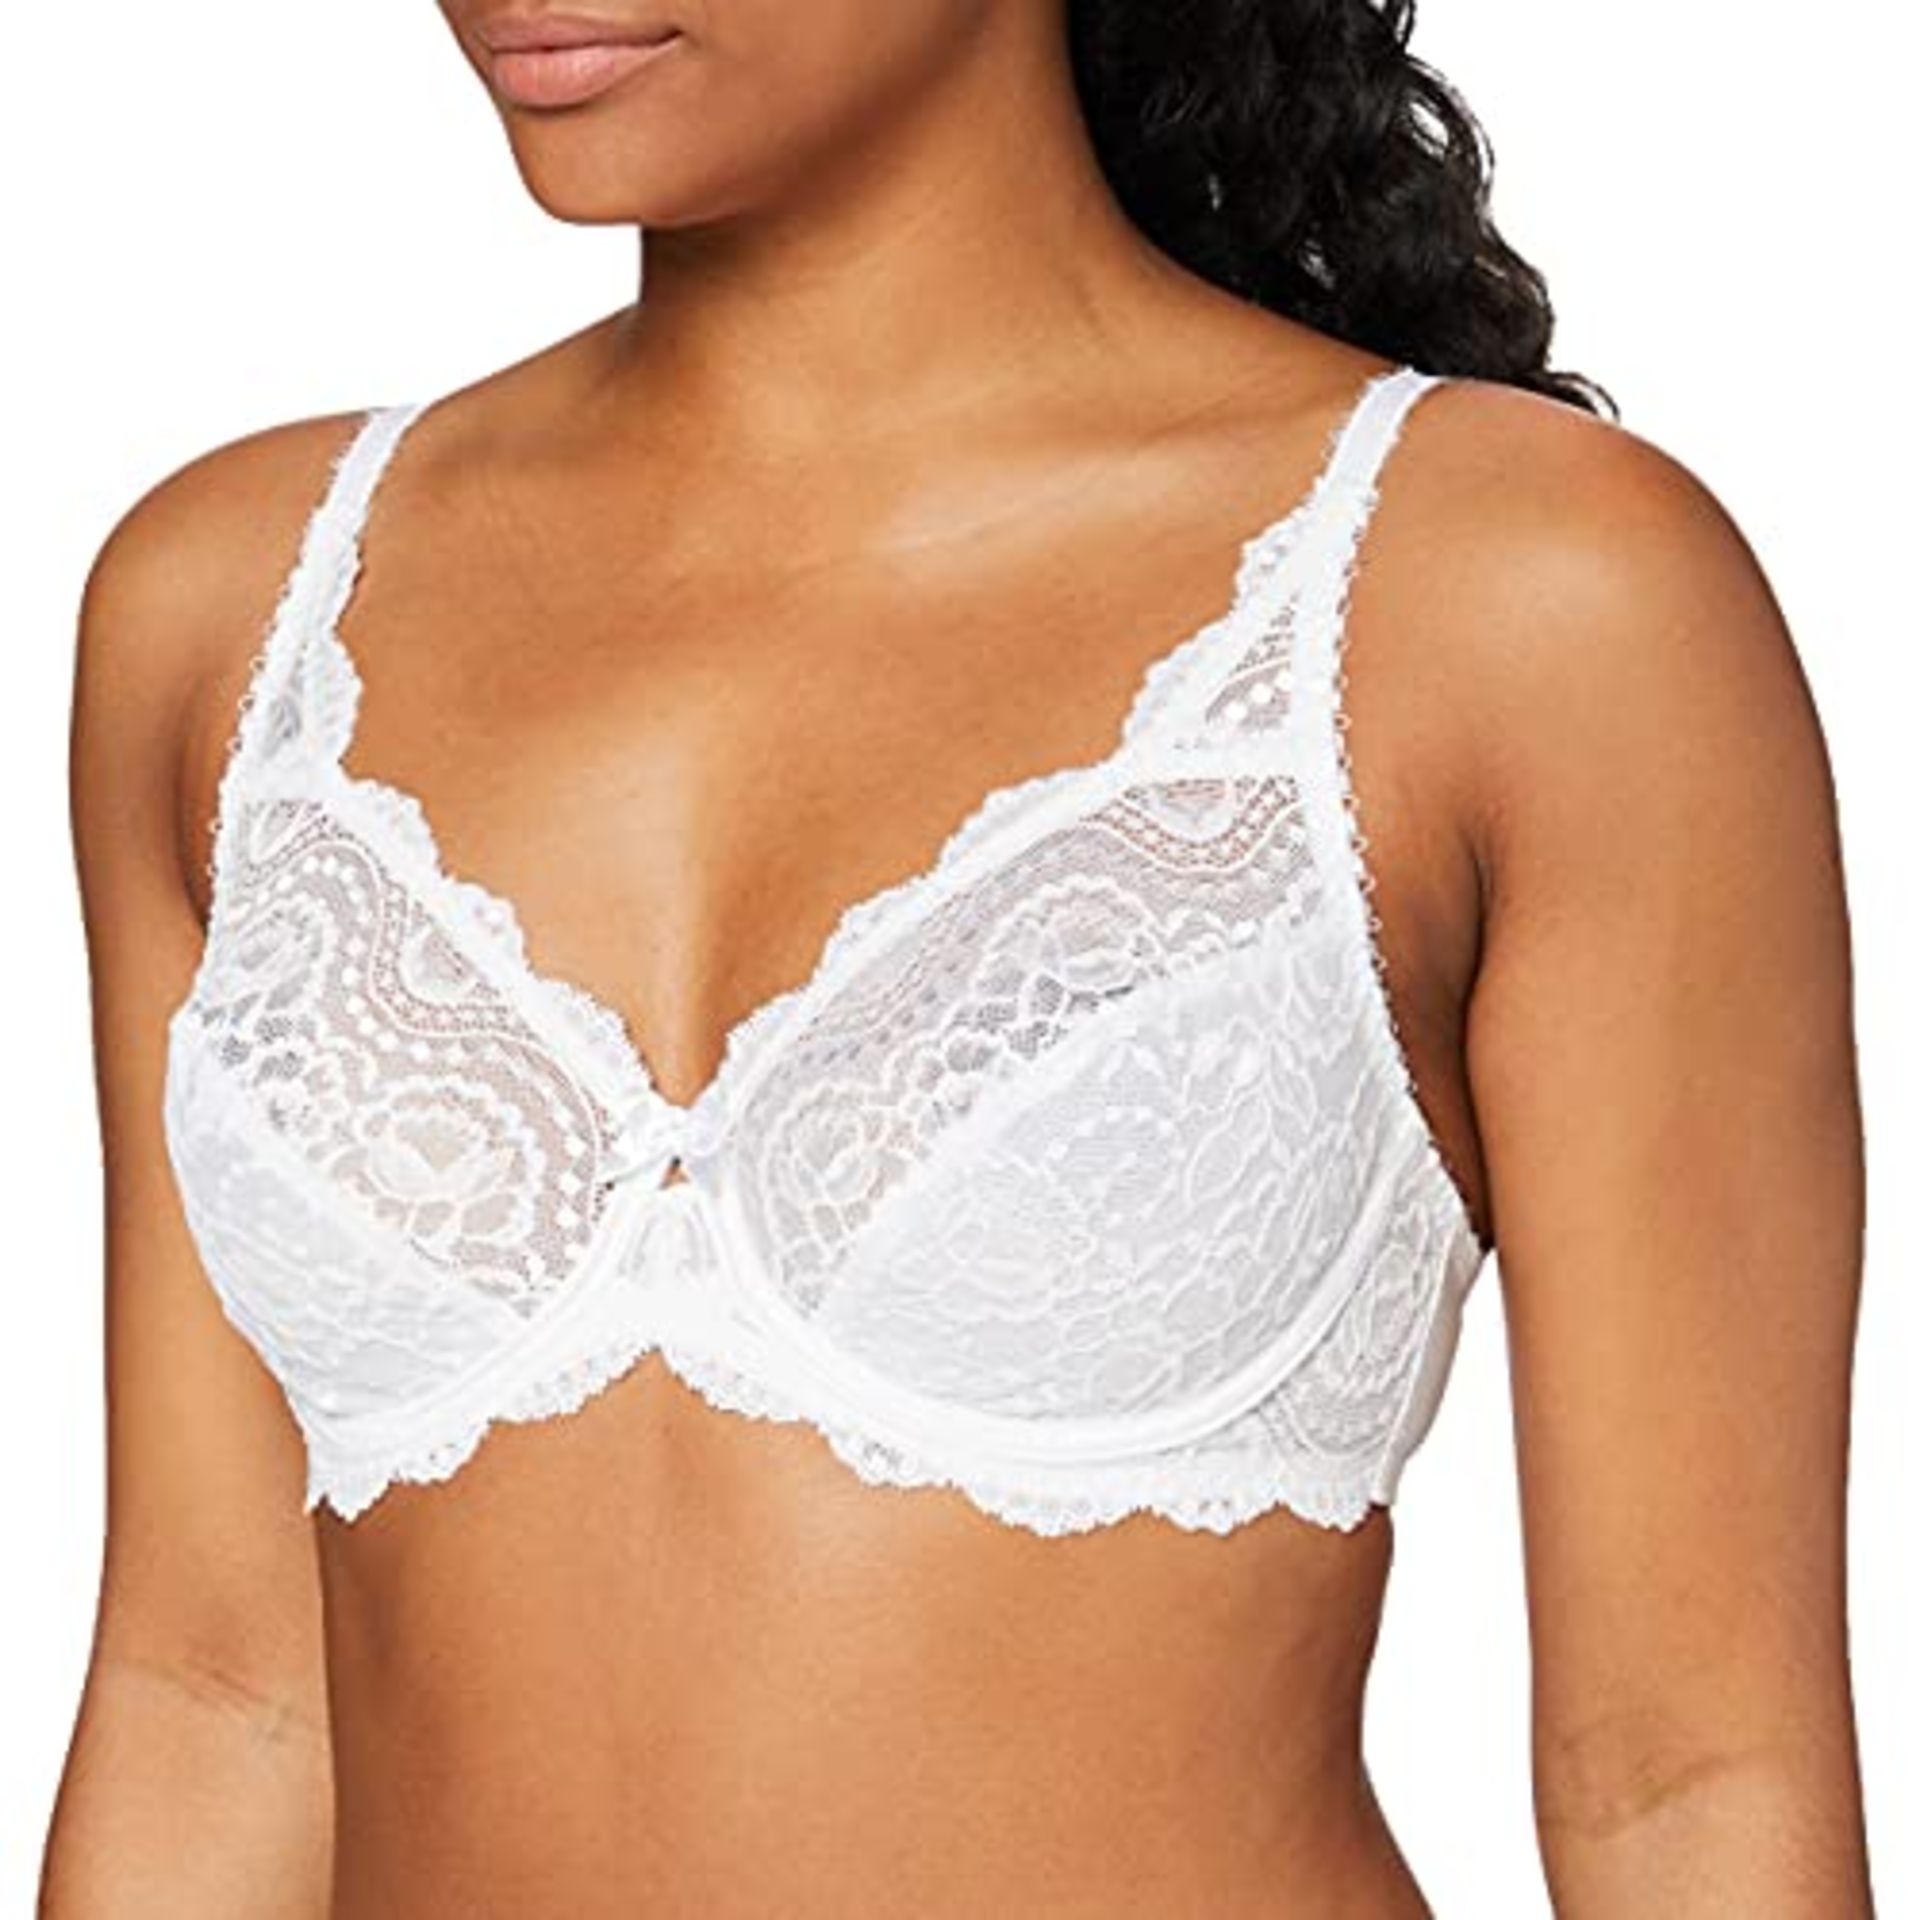 Playtex Flower Elegance Lace Underwired Bra Perfect Support x1 Woman, White, 105B